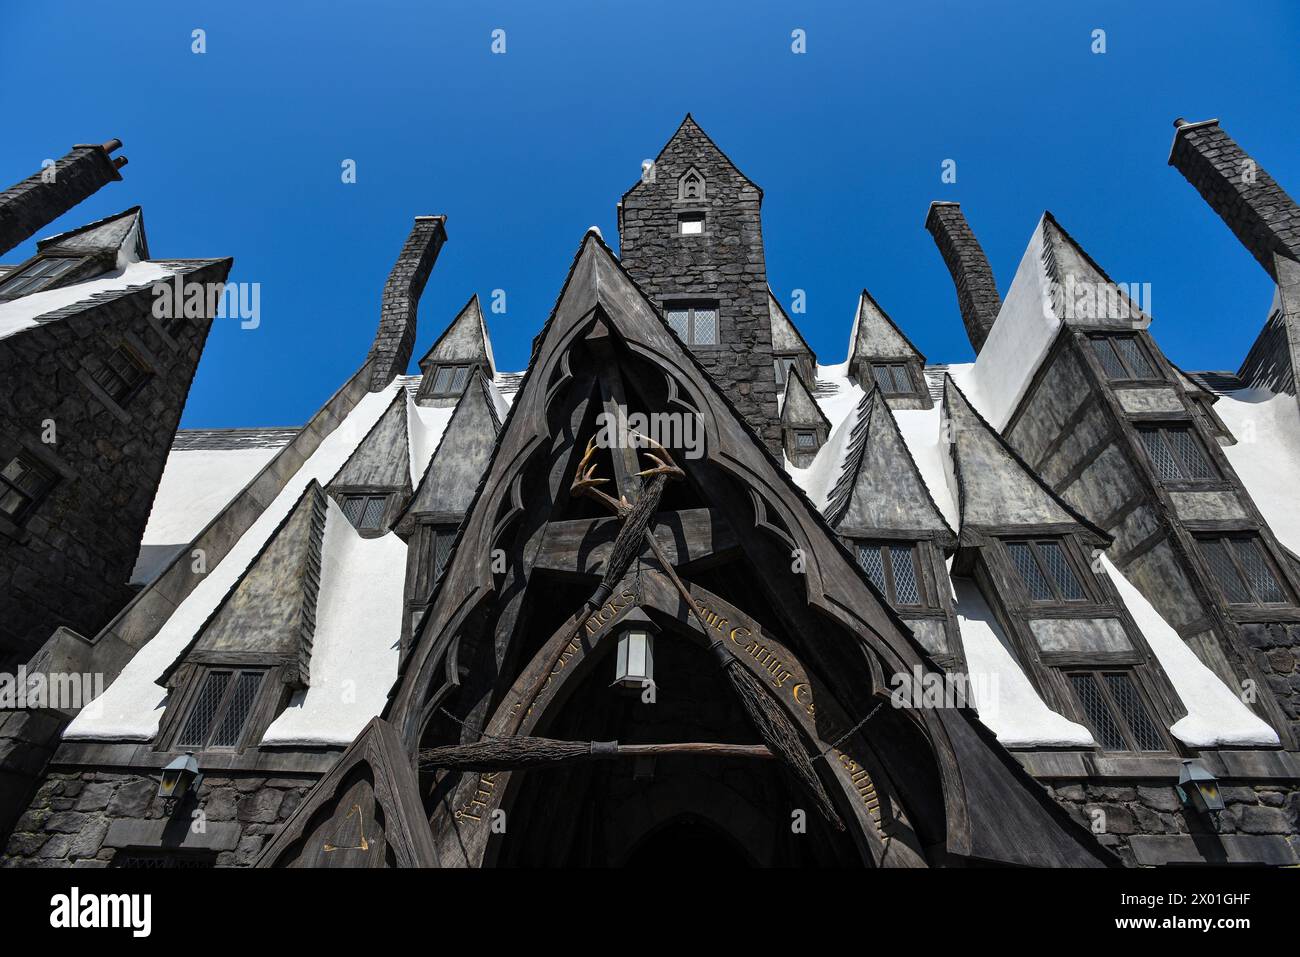 The Facade of the Three Broomsticks Restaurant at the Wizarding World of Harry Potter area in Universal Studios Hollywood - Los Angeles, California Stock Photo